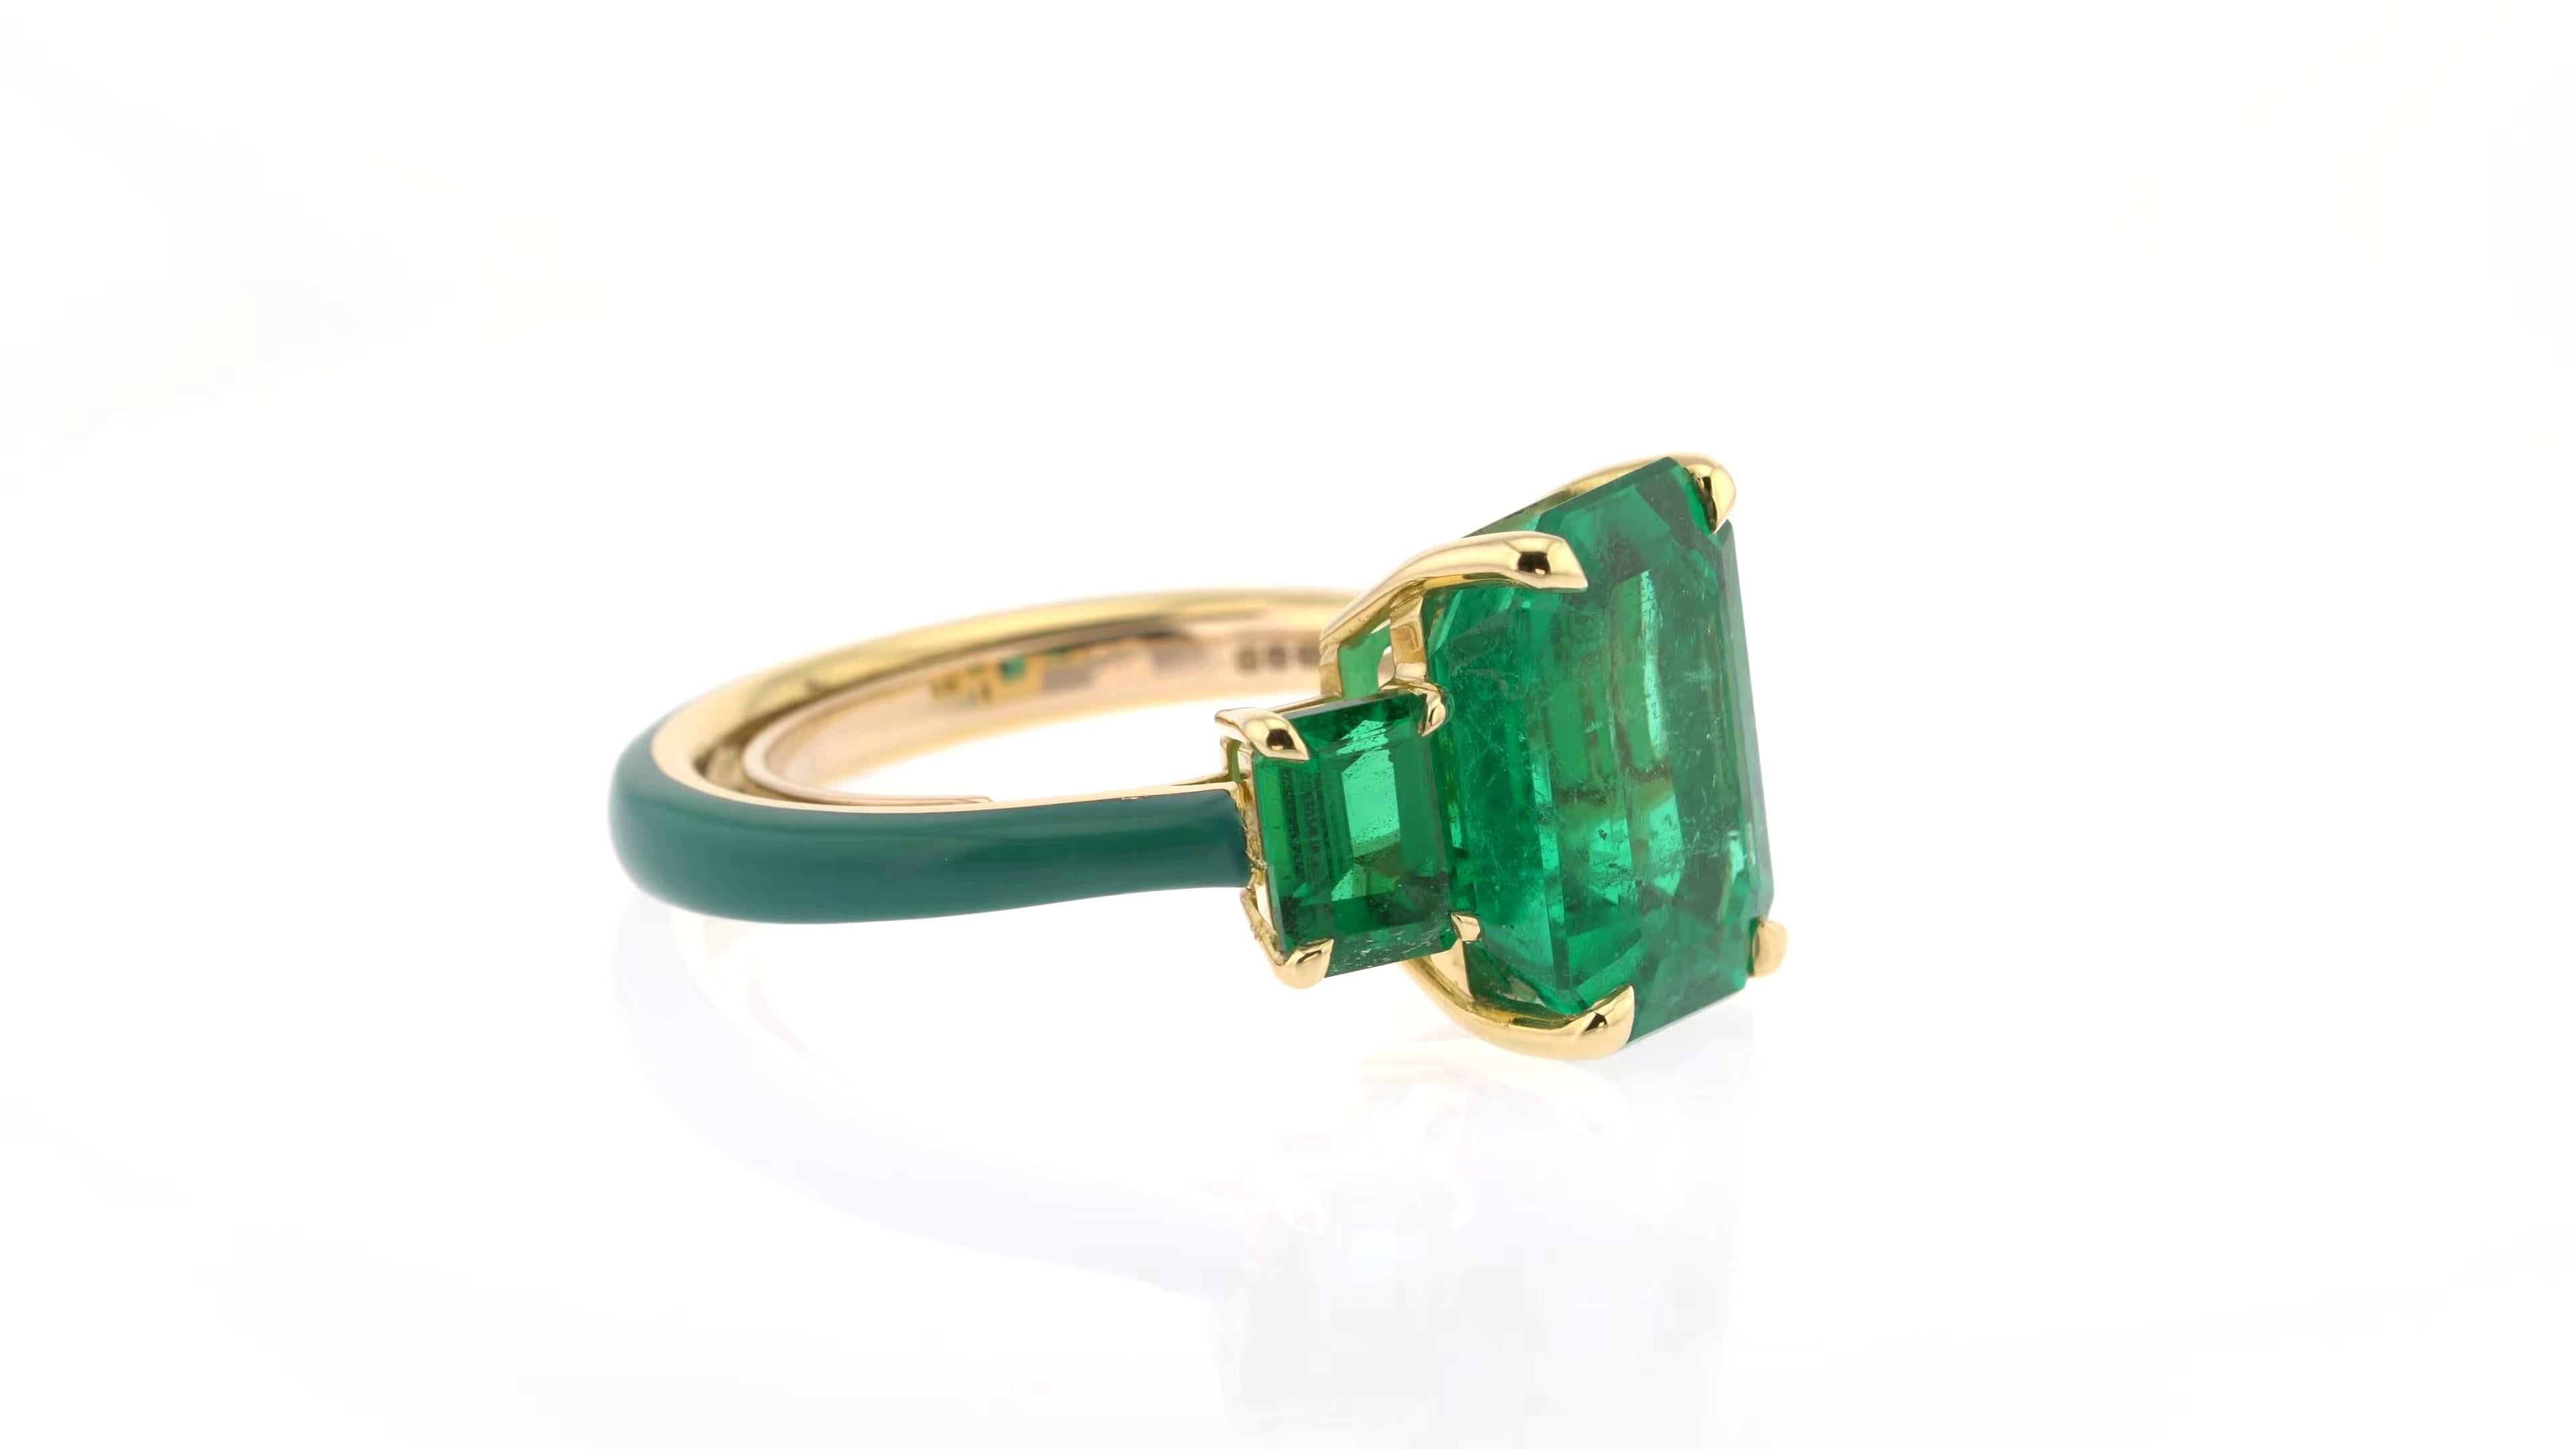 Emerald Cut 5.29 Carats Emerald Ring in Yellow Gold with Ceramic Detail